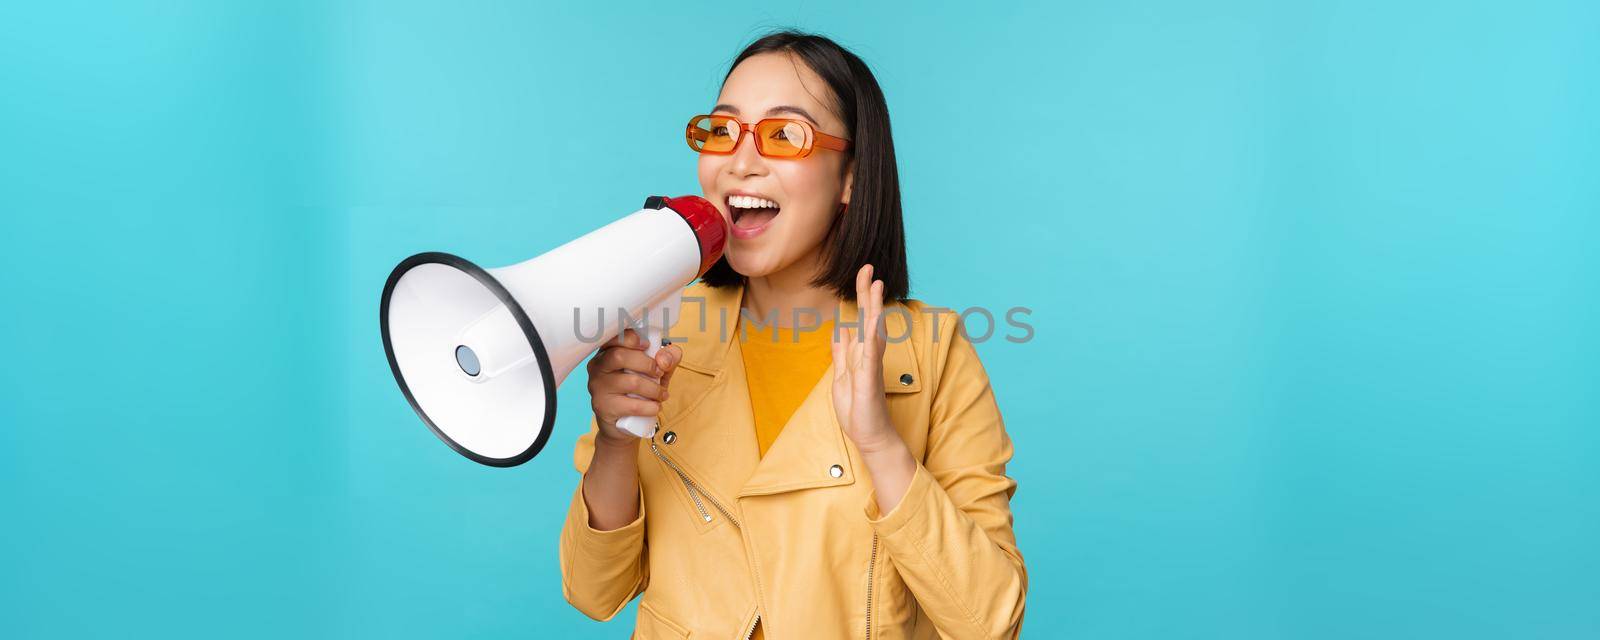 Stylish asian girl making announcement in megaphone, shouting with speakerphone and smiling, inviting people, recruiting, standing over blue background.